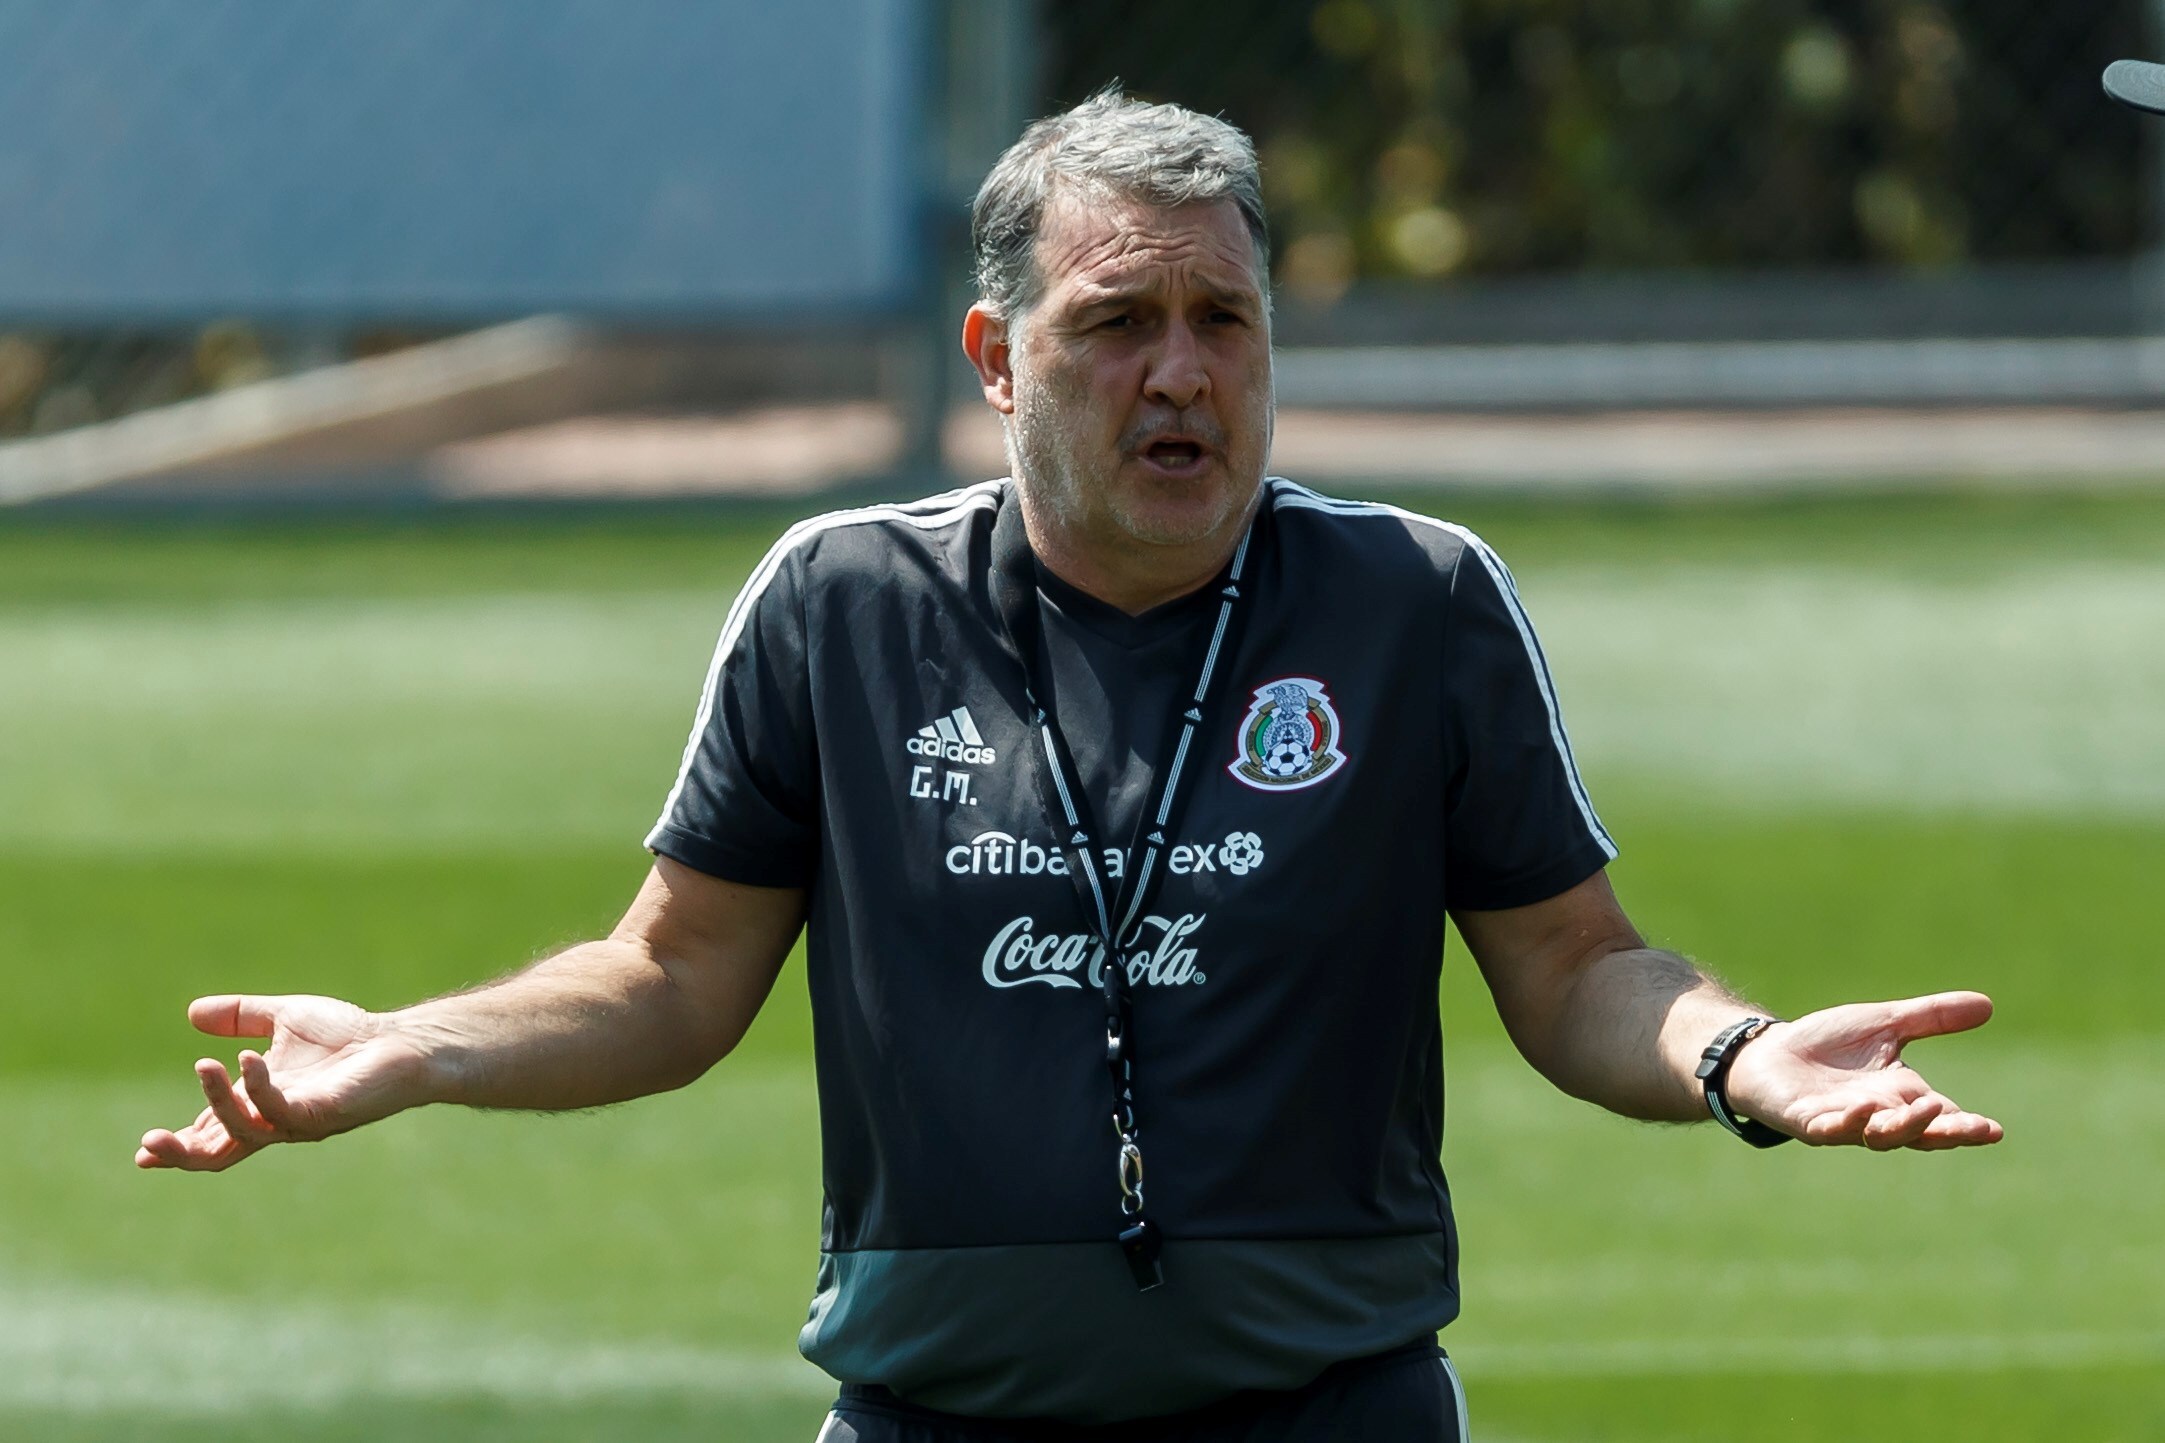 A file photo shows the coach of the Mexican-Argentine football team, Gerardo "My Father" Martin.  EFE / Jose Mendes